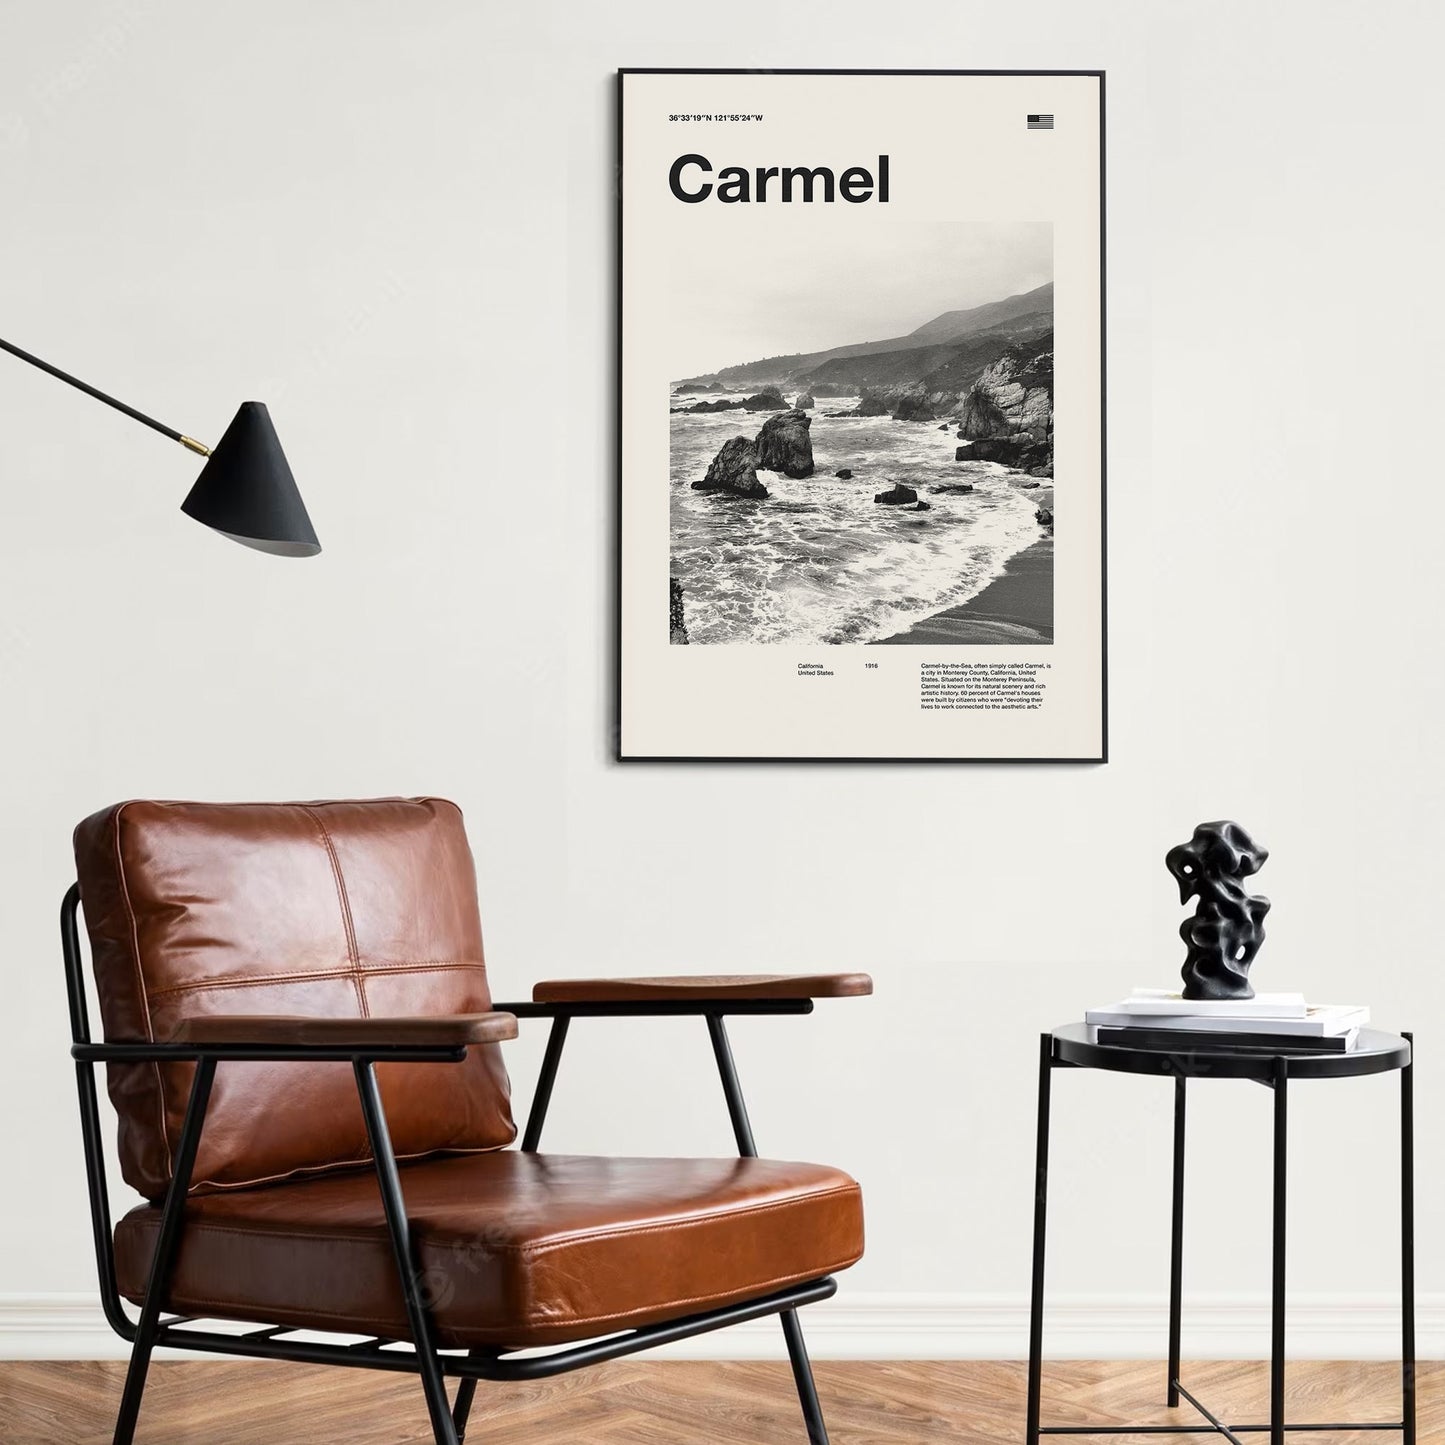 A Carmel by the sea-themed art print poster from thewallflowerclub.